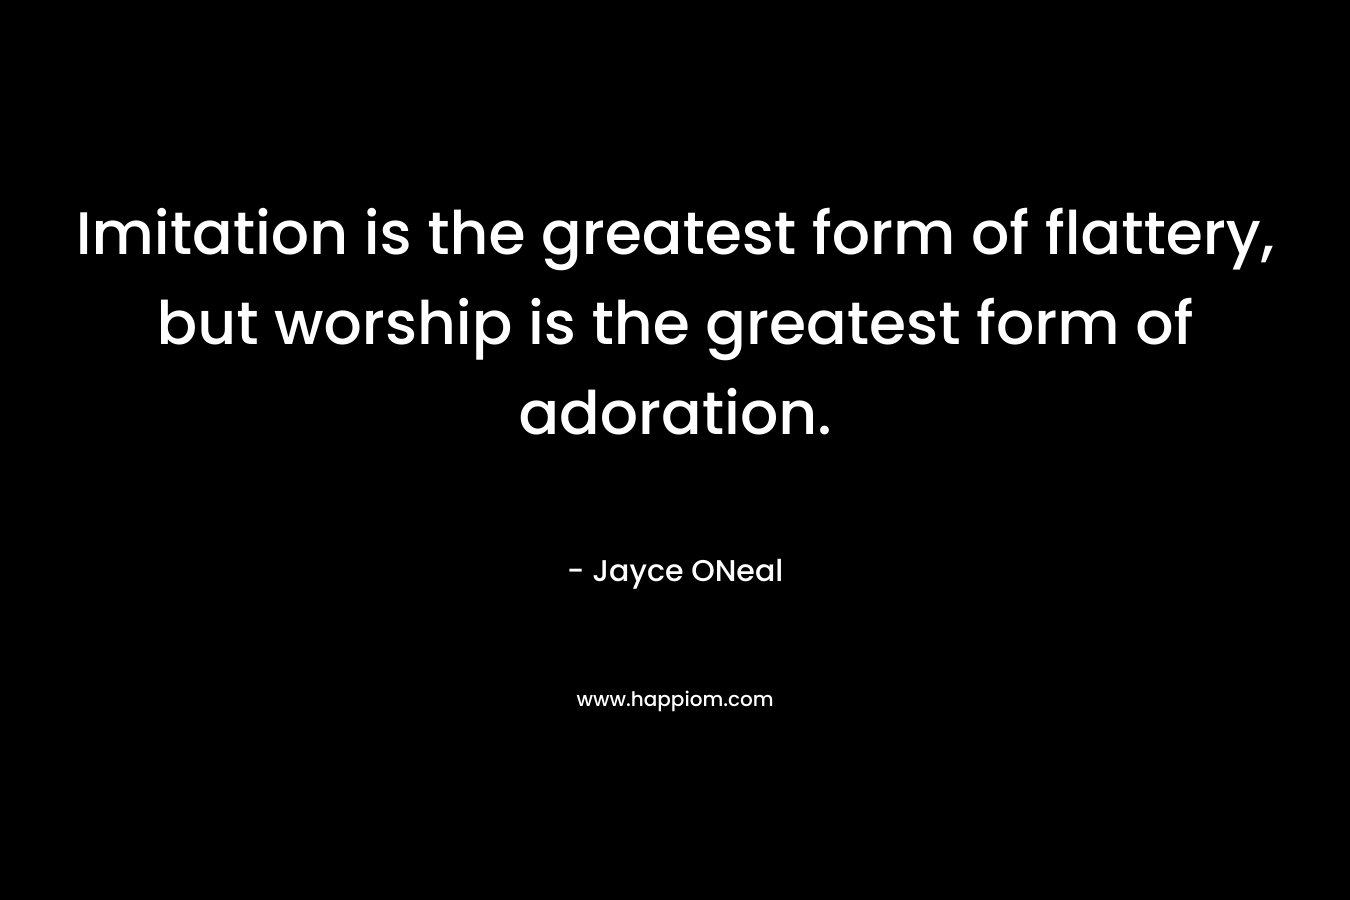 Imitation is the greatest form of flattery, but worship is the greatest form of adoration.